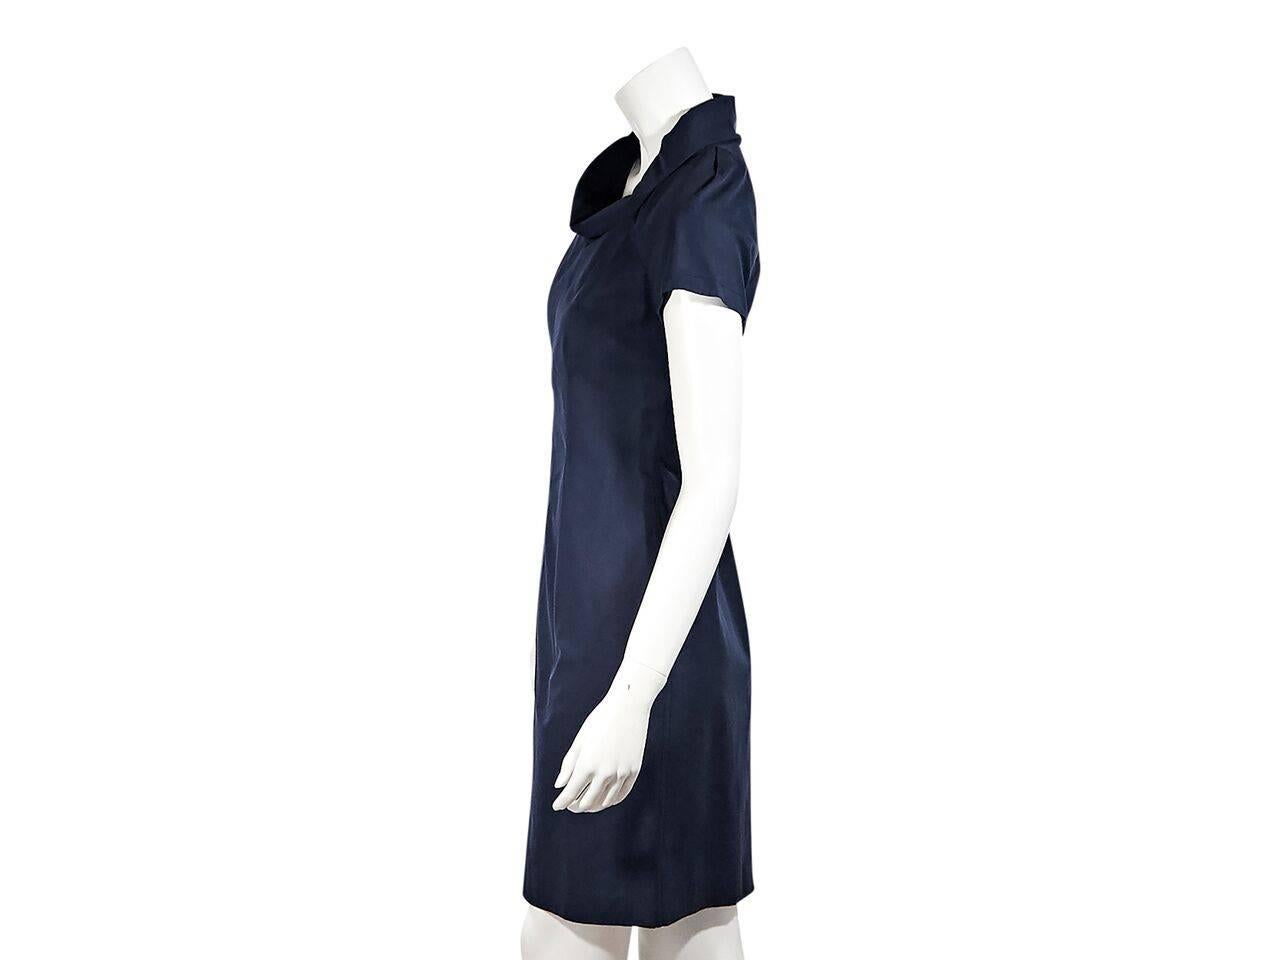 Product details:  Navy blue sheath dress by Prada.  Shawl neck.  Short sleeves.  Seam work creates a flattering silhouette.  Exposed back zip closure.  Back center hem vent.  Label size IT 38. 
Condition: Pre-owned. New with tags.
Est. Retail $